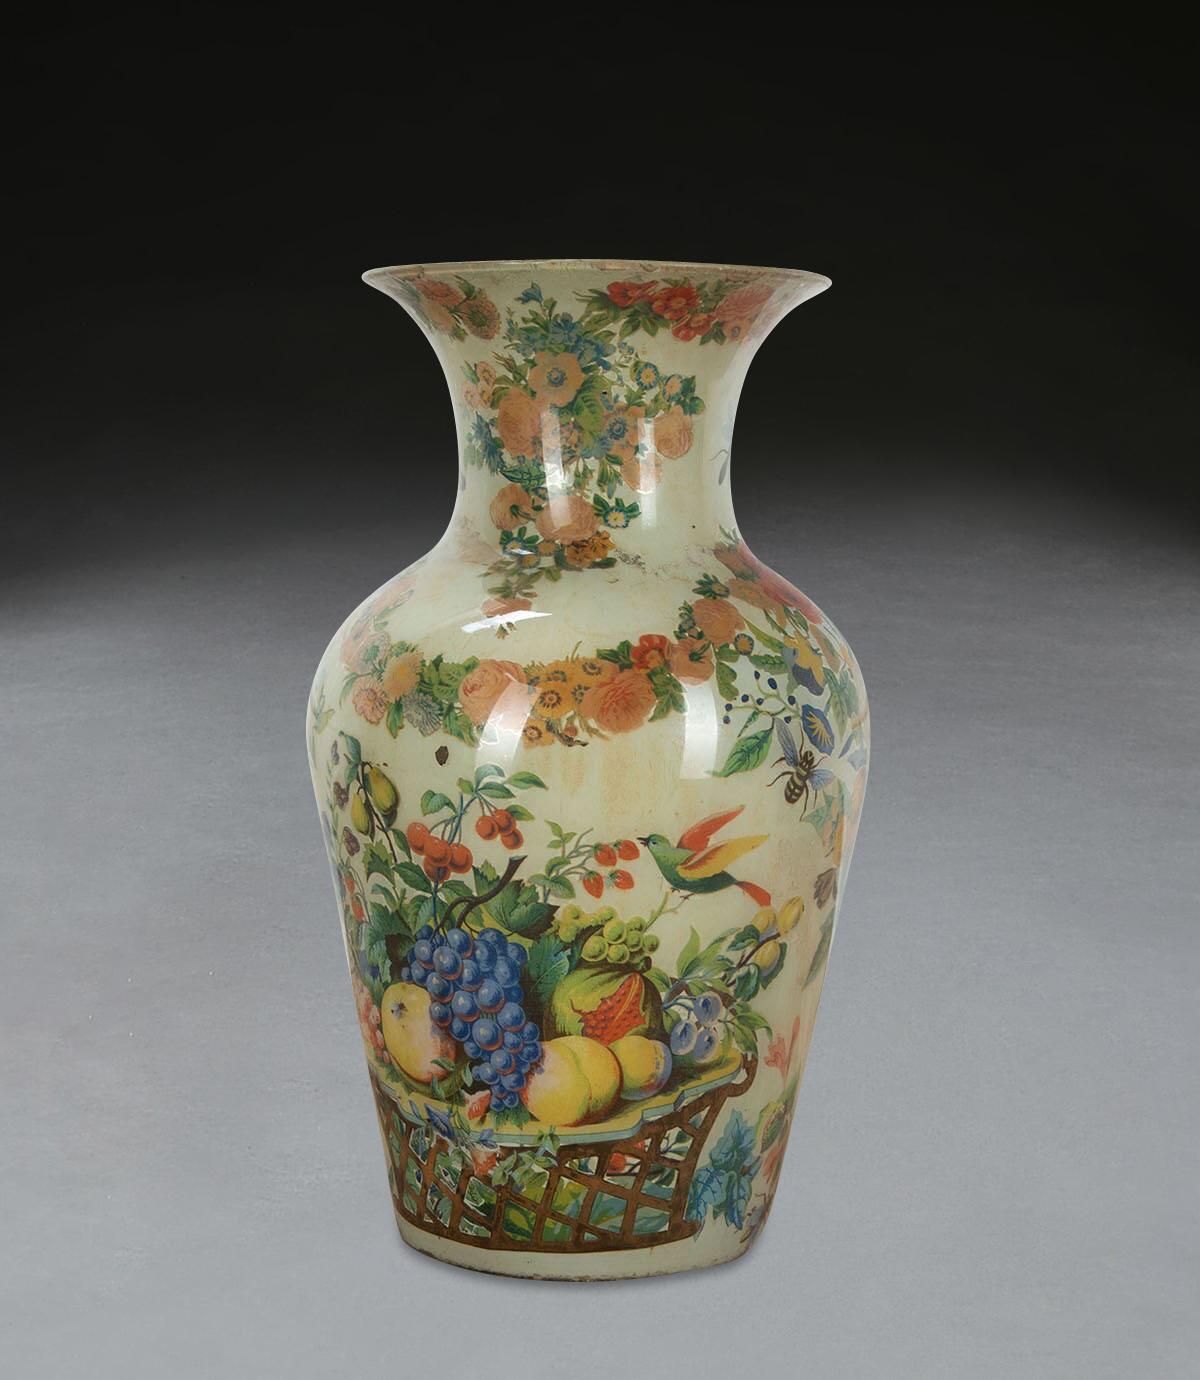 A colourful C19th large decalcomania vase with the original brightly coloured floral foreground on a sage green background. Of good size and shapely form. Good condition with no chips, flaking or cracks. Circa 1840.

H: 31 cm (12 3/16